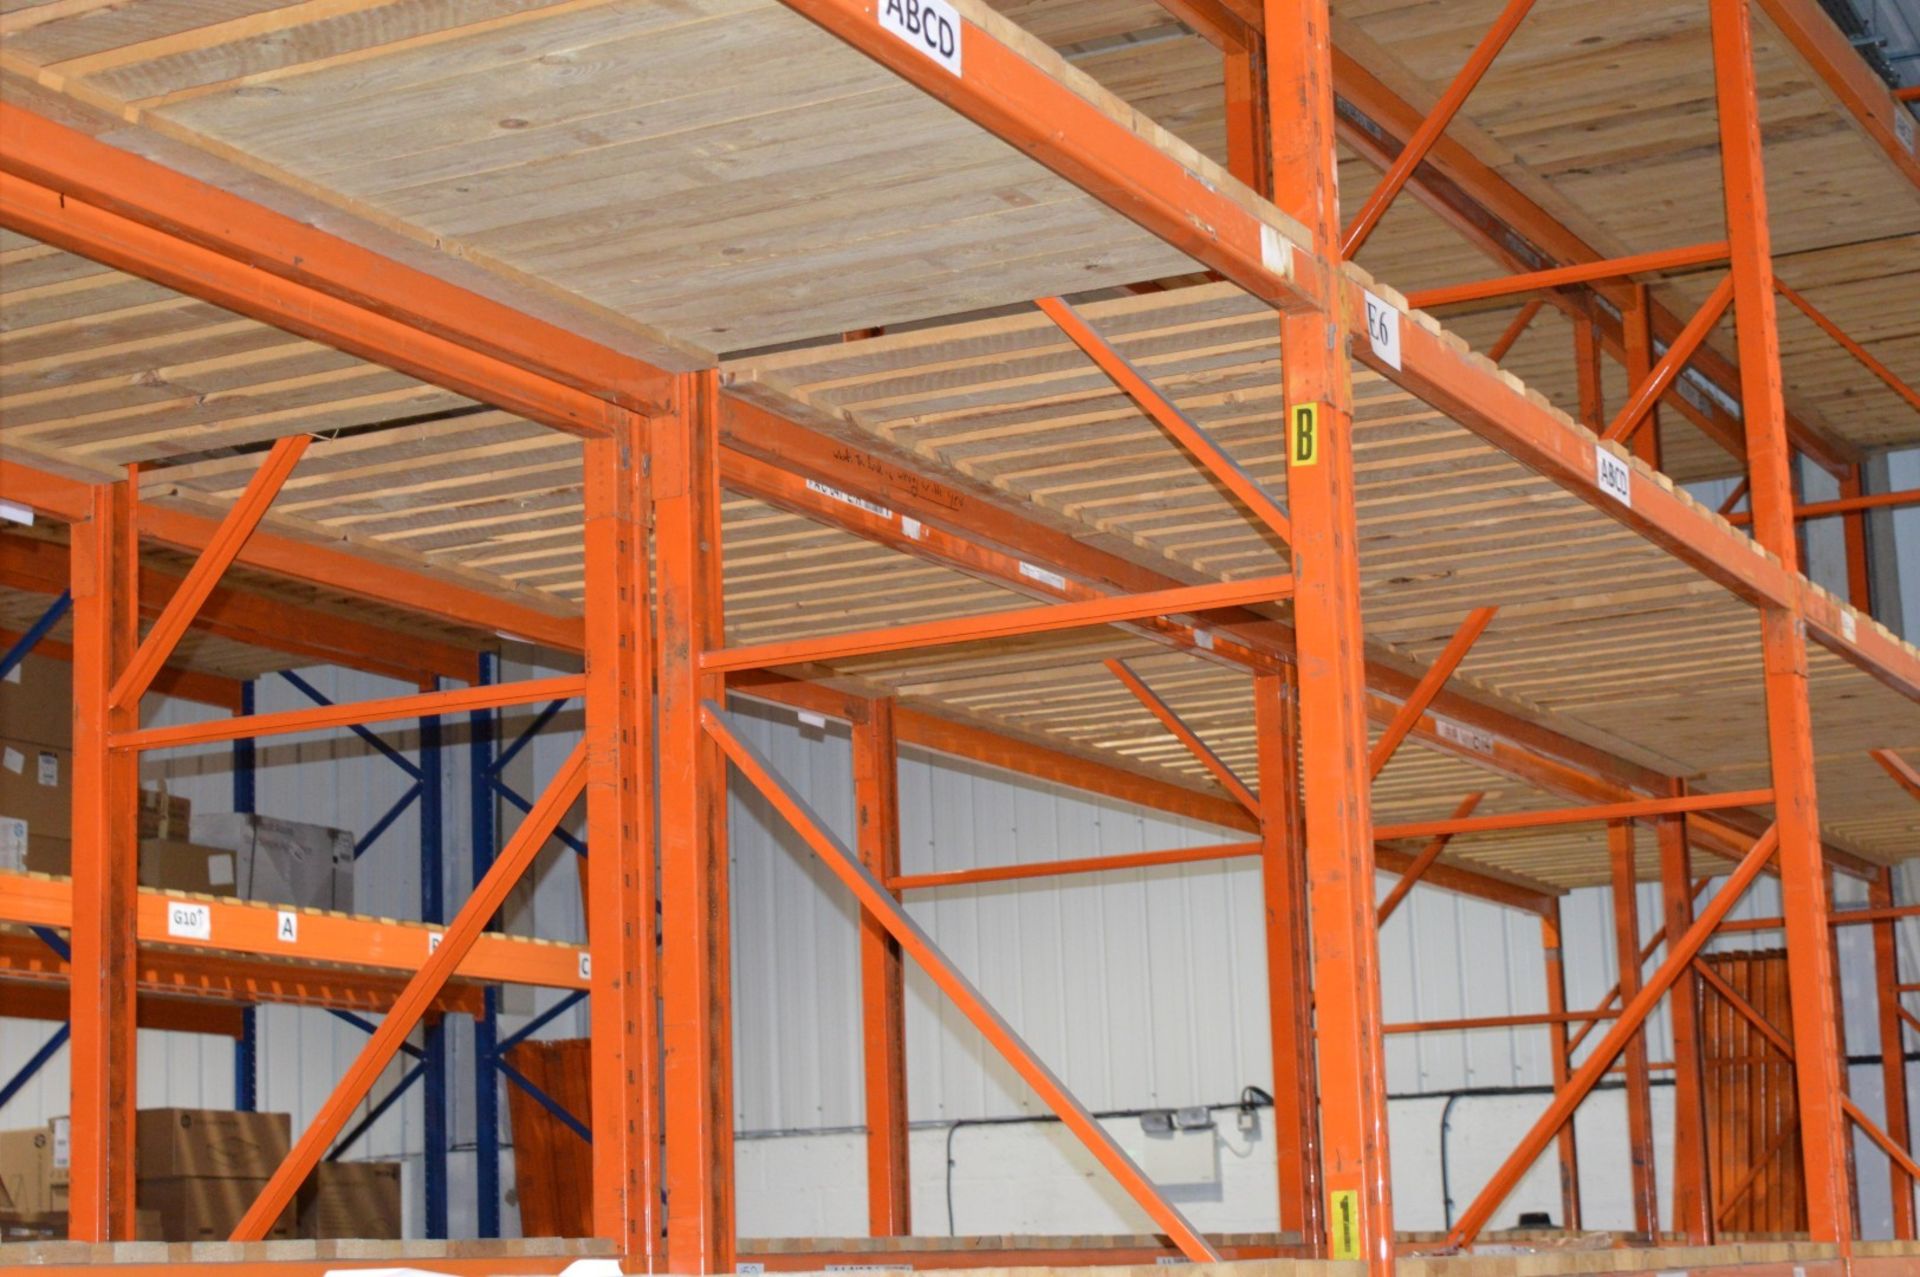 8 x Bays of Warehouse PALLET RACKING - Lot Includes 110 x Uprights, 56 x Crossbeams, 1 x - Image 8 of 9